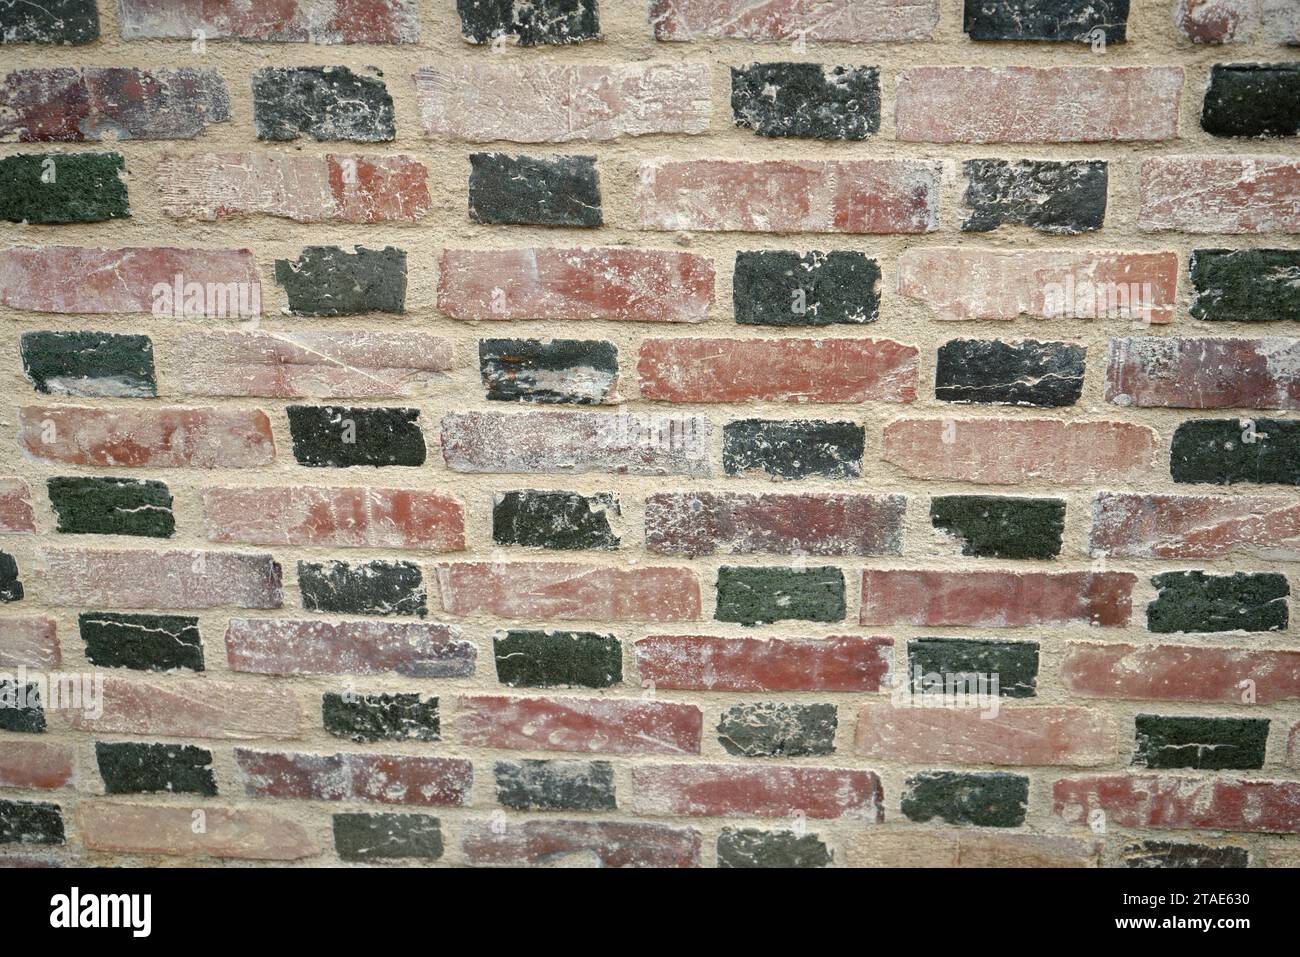 An old brick background showing texture and uniform lines. Stock Photo